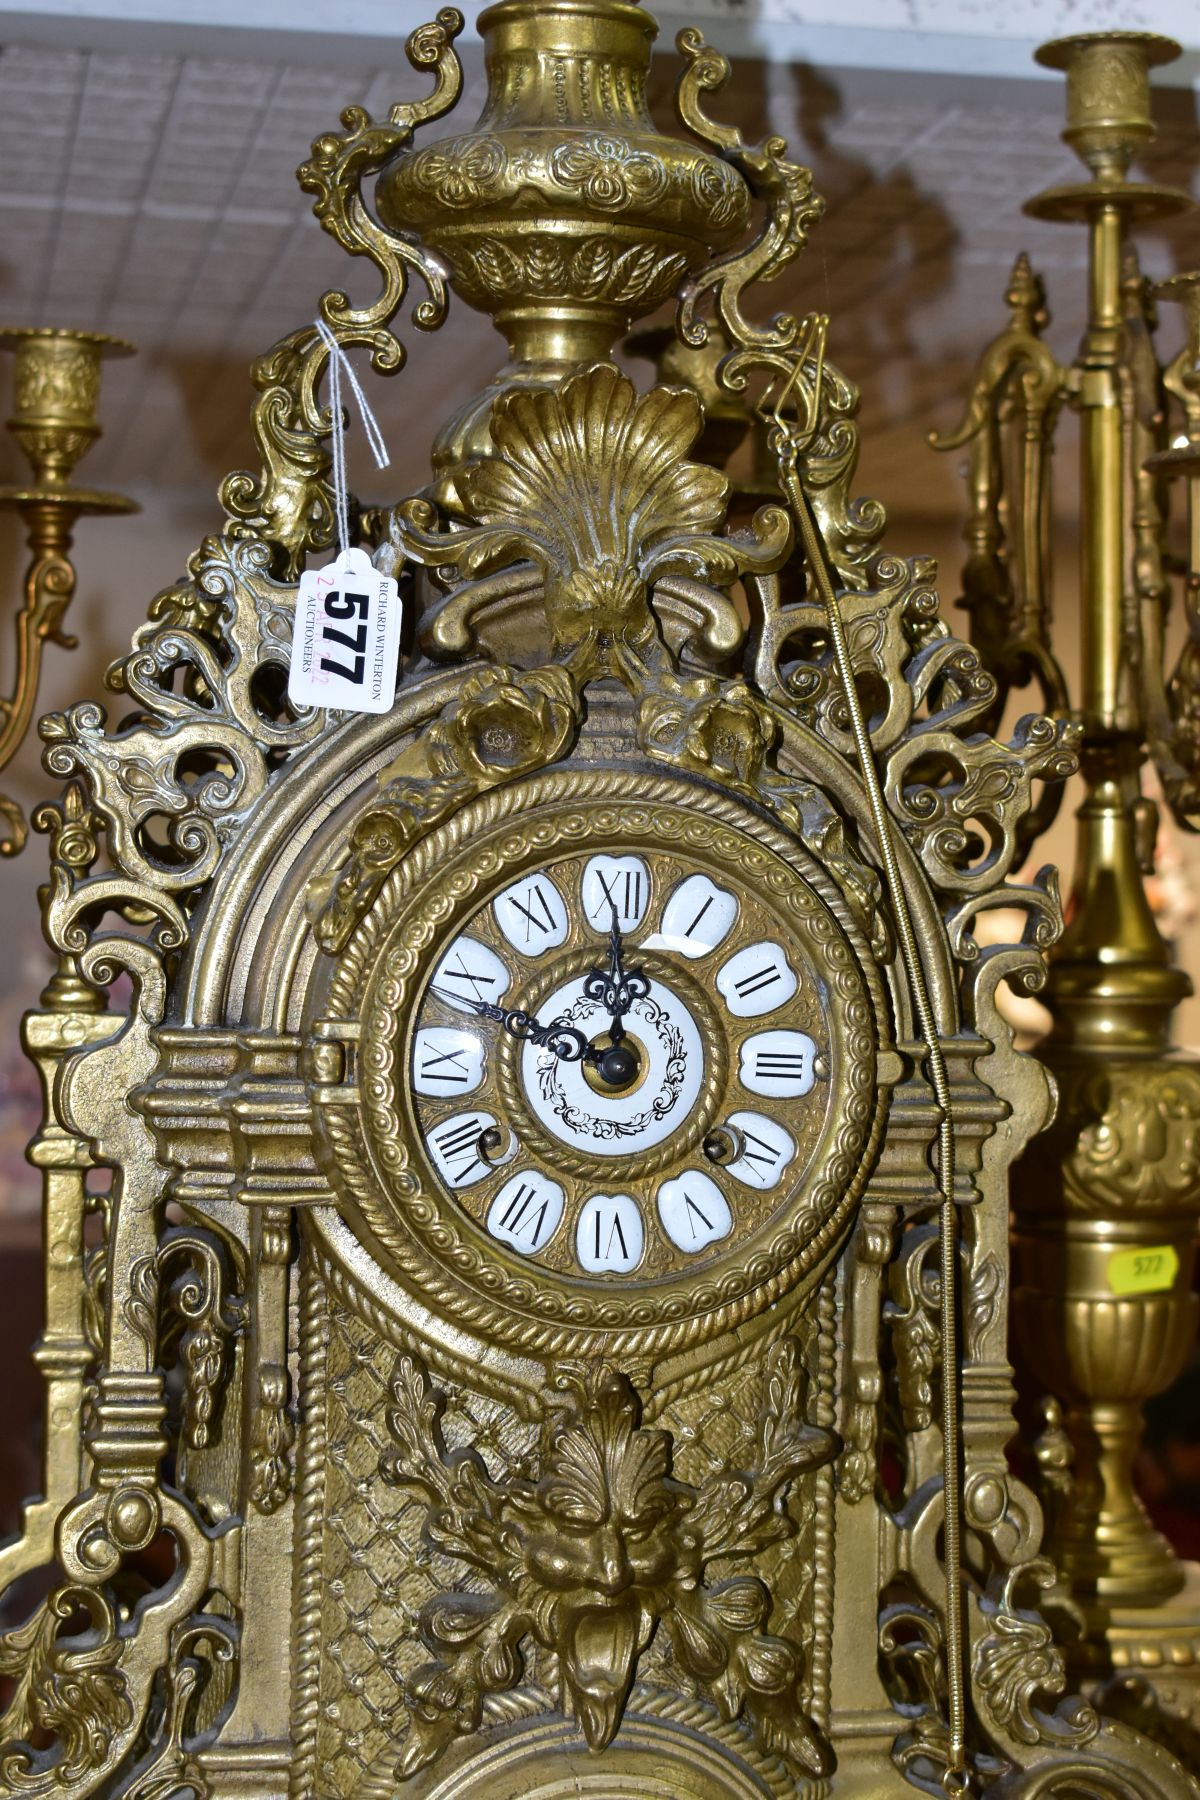 A REPRODUCTION BRASS CLOCK GARNITURE, the clock with ornate cast brass case with twin handled urn - Image 2 of 9